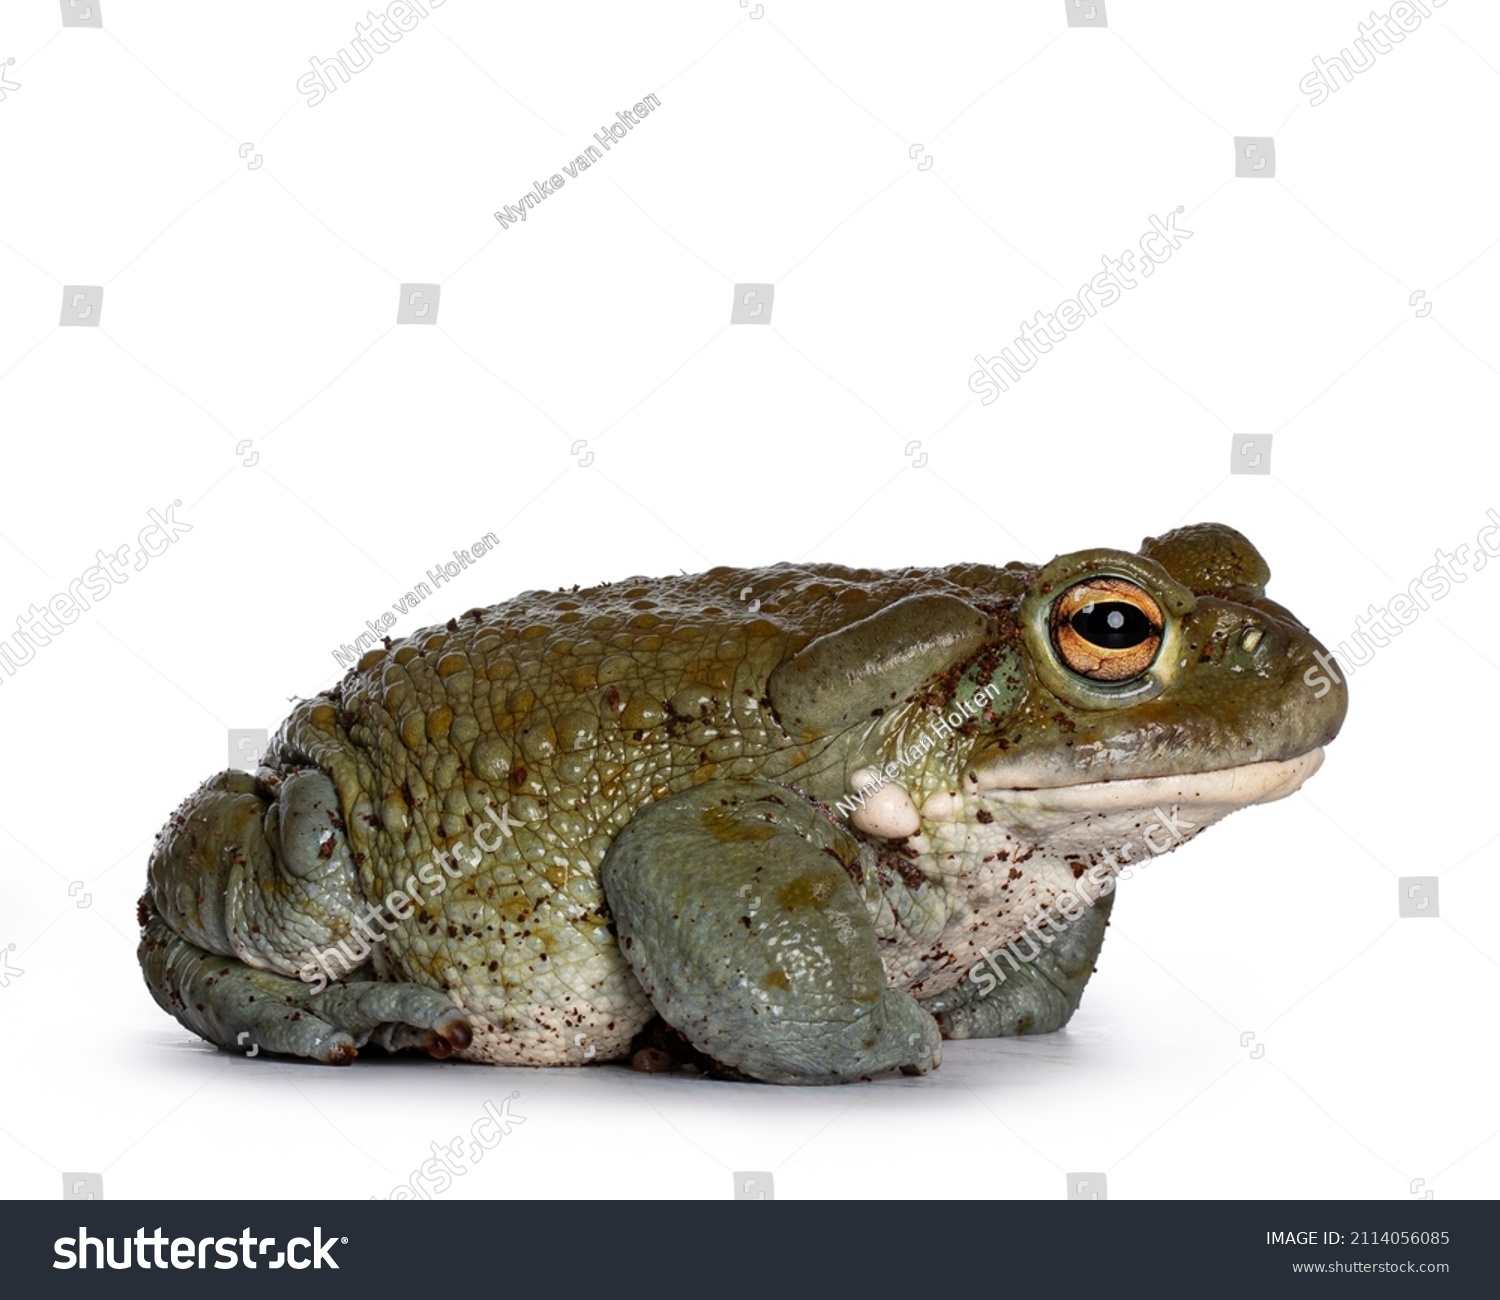 Bufo Alvarius aka Colorado River Toad, sitting side ways. Looking ahead with golden eyes. Isolated on white background. #2114056085